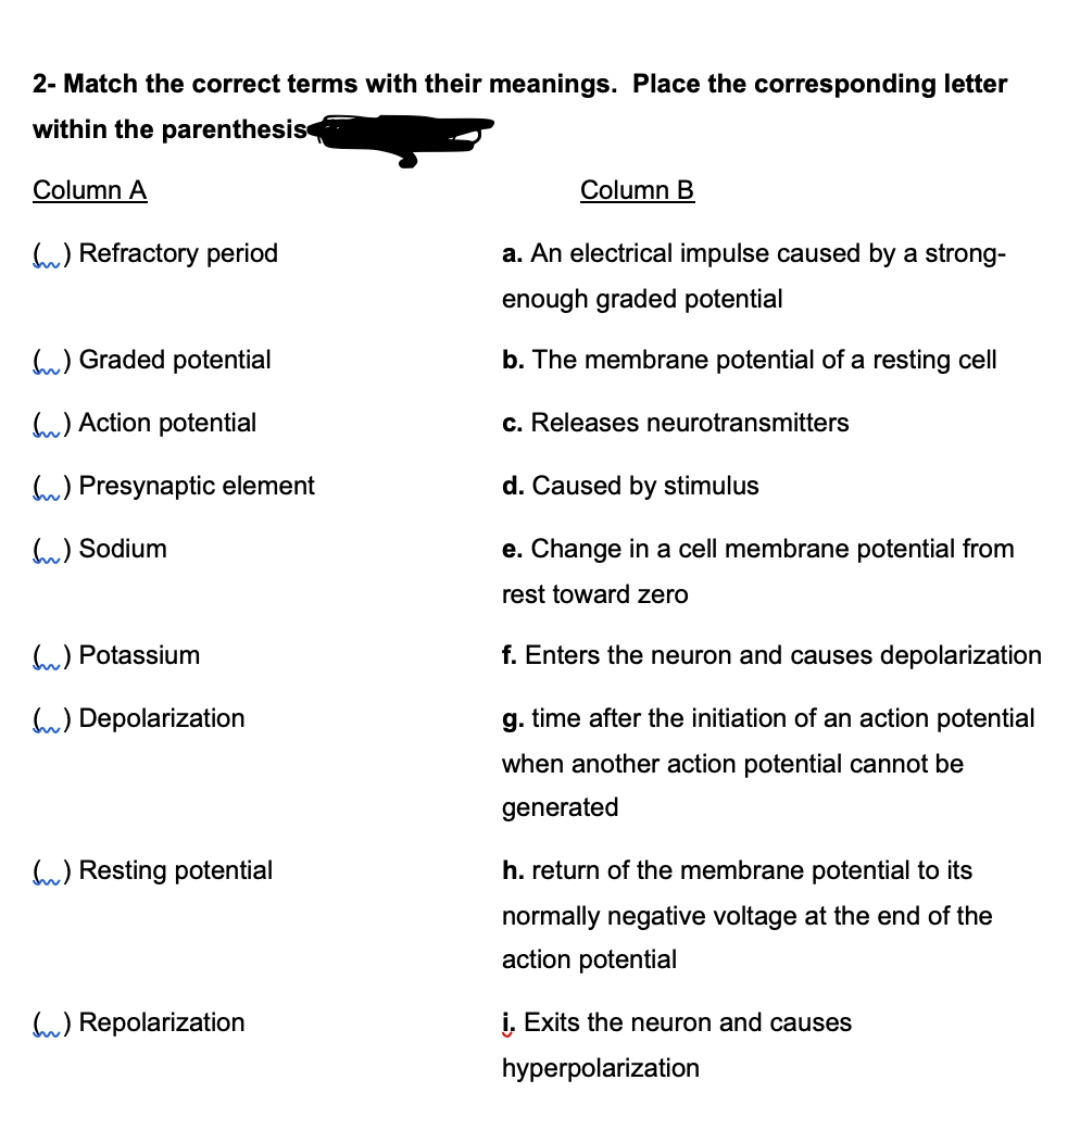 2- Match the correct terms with their meanings. Place the corresponding letter
within the parenthesis
Column A
() Refractory period
() Graded potential
() Action potential
) Presynaptic element
() Sodium
() Potassium
() Depolarization
() Resting potential
() Repolarization
Column B
a. An electrical impulse caused by a strong-
enough graded potential
b. The membrane potential of a resting cell
c. Releases neurotransmitters
d. Caused by stimulus
e. Change in a cell membrane potential from
rest toward zero
f. Enters the neuron and causes depolarization
g. time after the initiation of an action potential
when another action potential cannot be
generated
h. return of the membrane potential to its
normally negative voltage at the end of the
action potential
i. Exits the neuron and causes
hyperpolarization